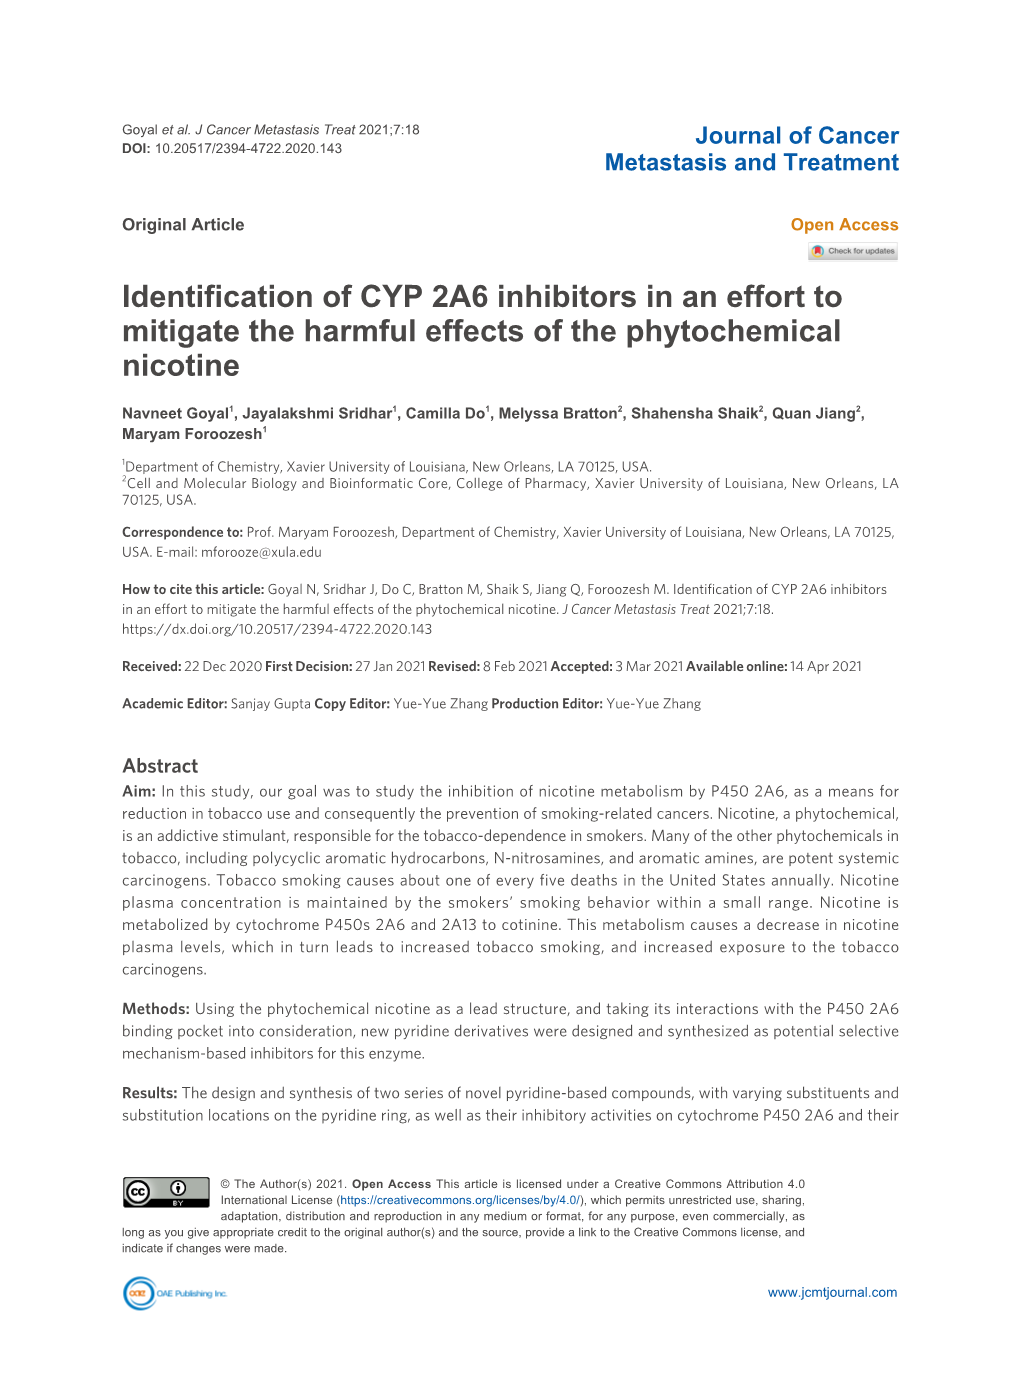 Identification of CYP 2A6 Inhibitors in an Effort to Mitigate the Harmful Effects of the Phytochemical Nicotine